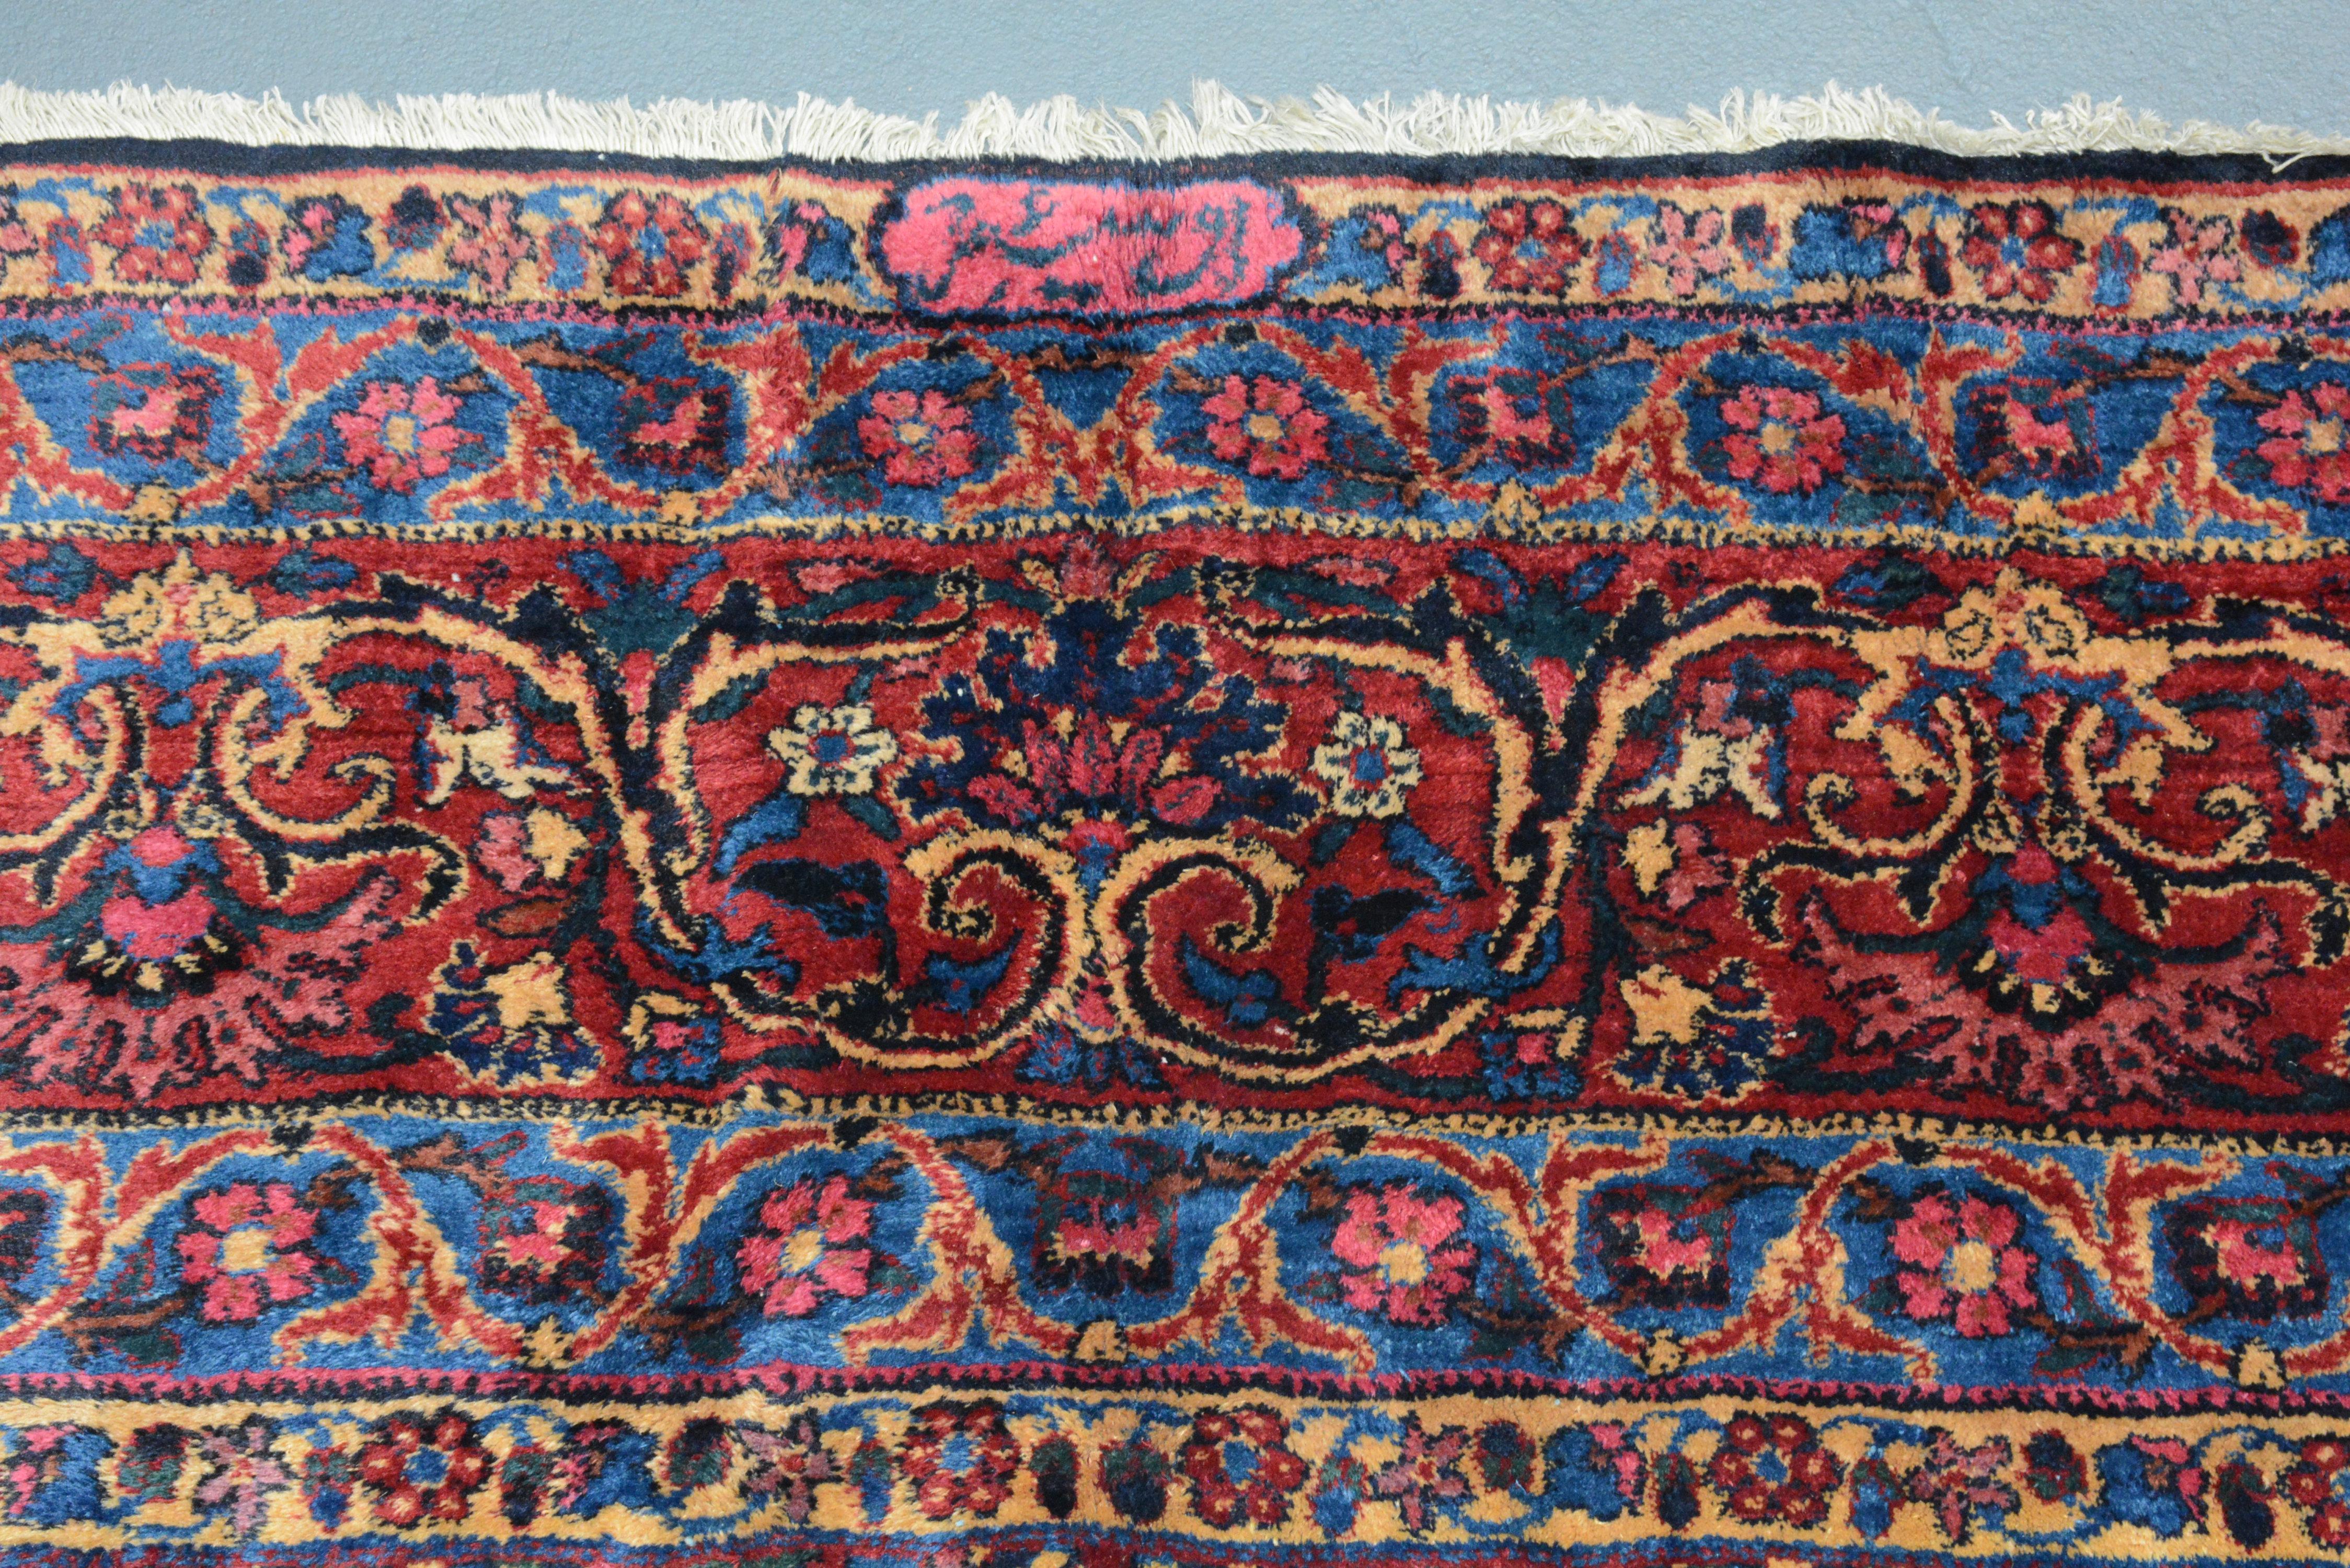 The city and province of Kerman is geographically isolated in the great desert of southern Persia. An industry of both shawl and carpet production has flourished there since the Safavid Dynasty of the sixteenth century. Carpets produced here, once